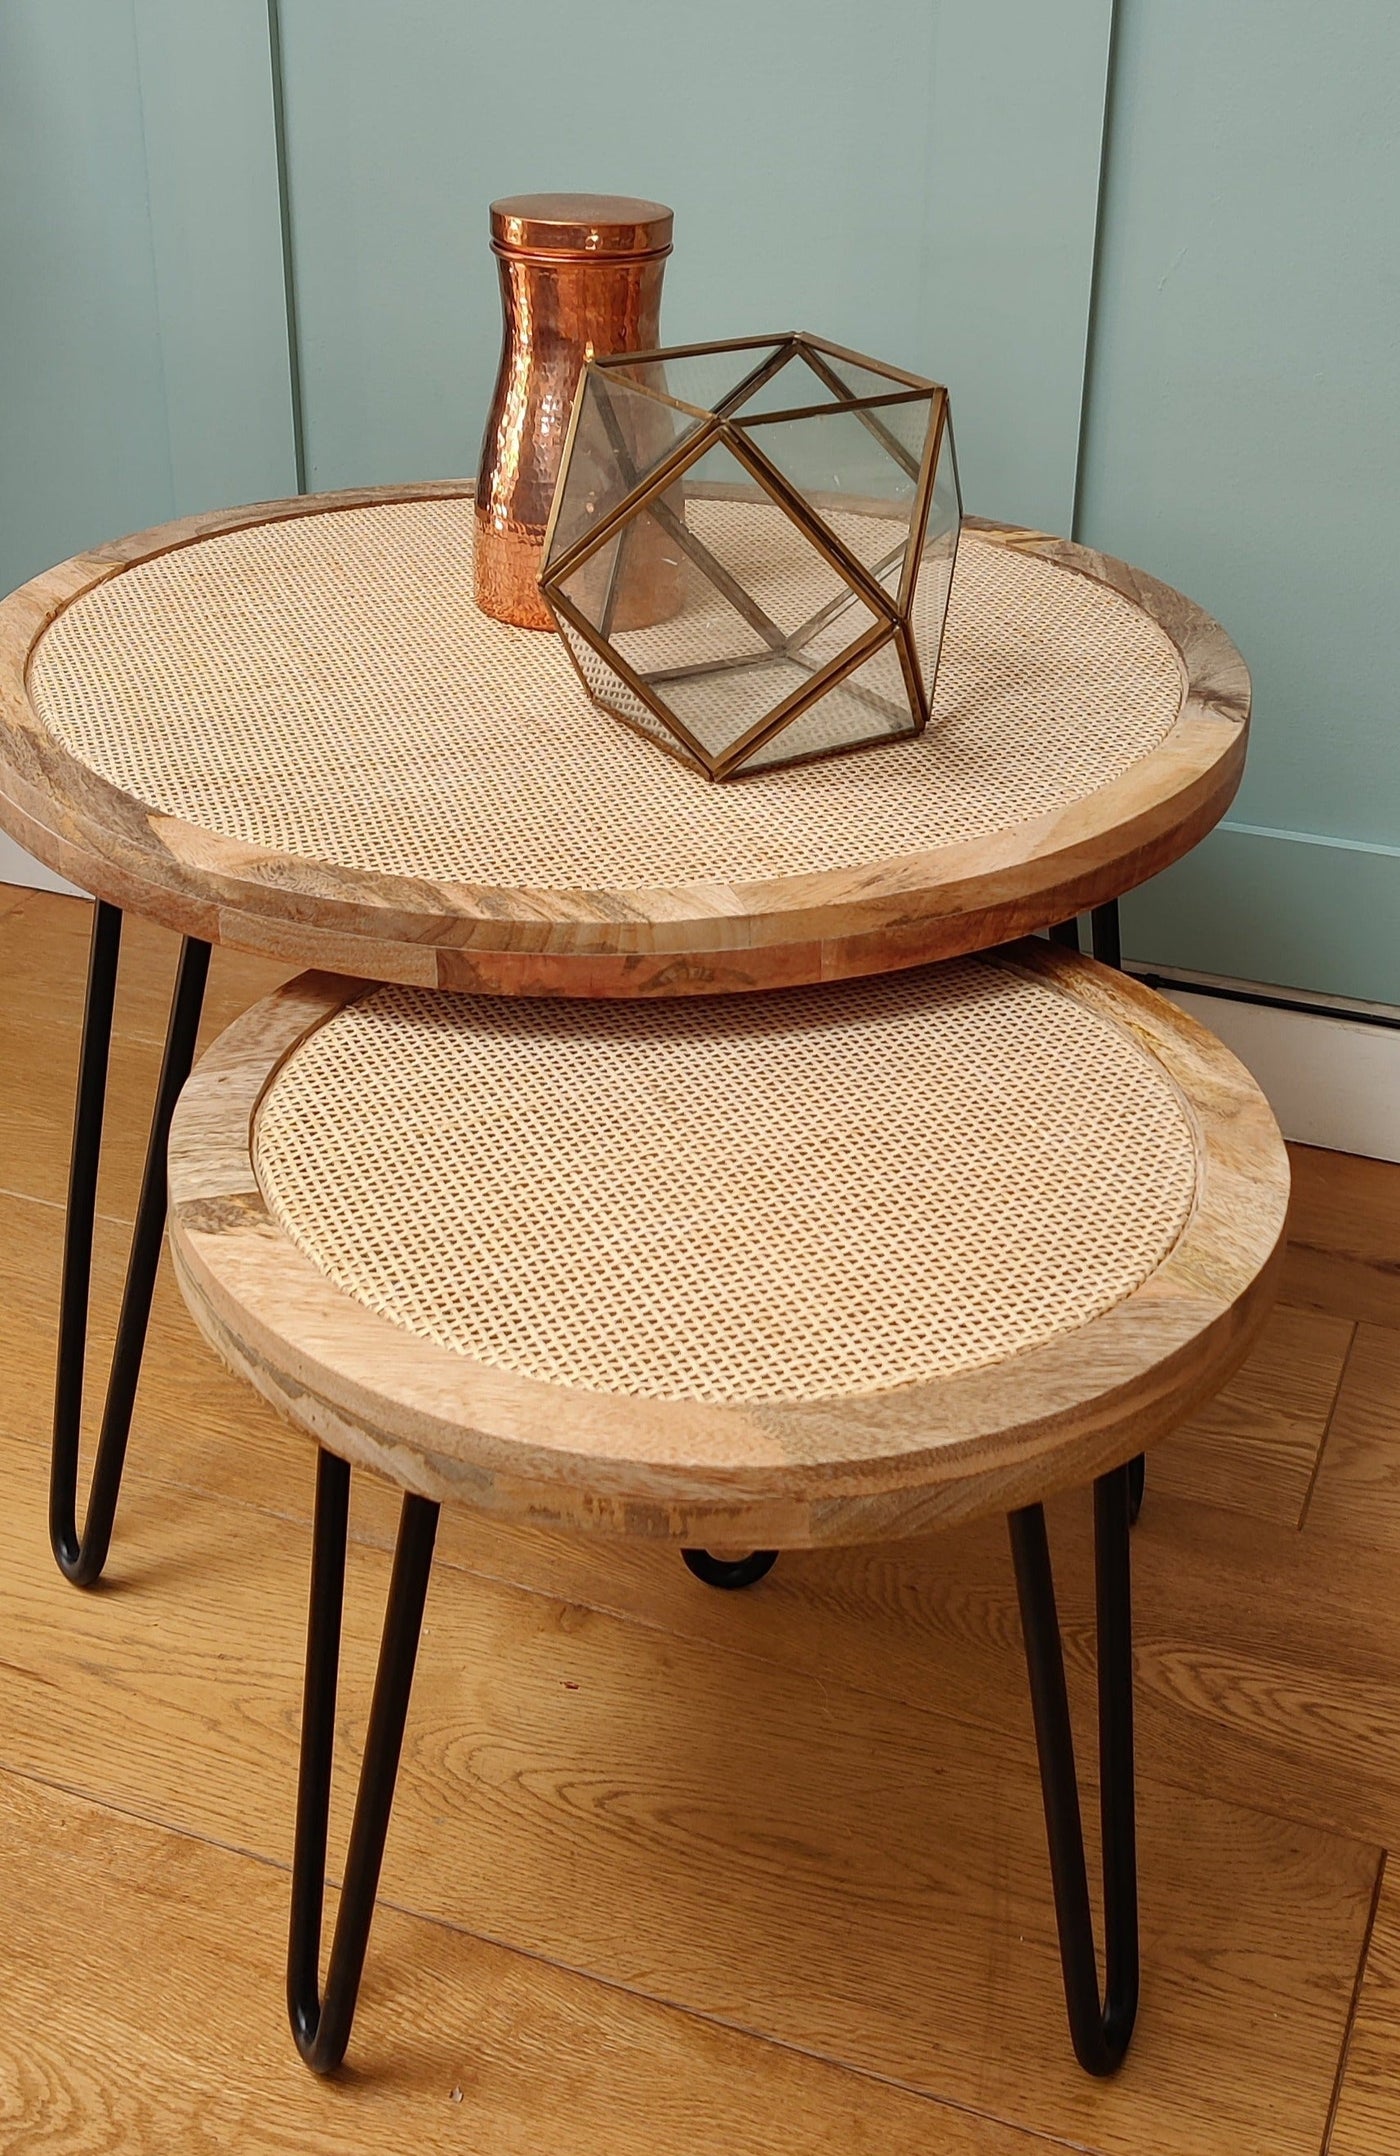 Round cane side table with rustic natural finish